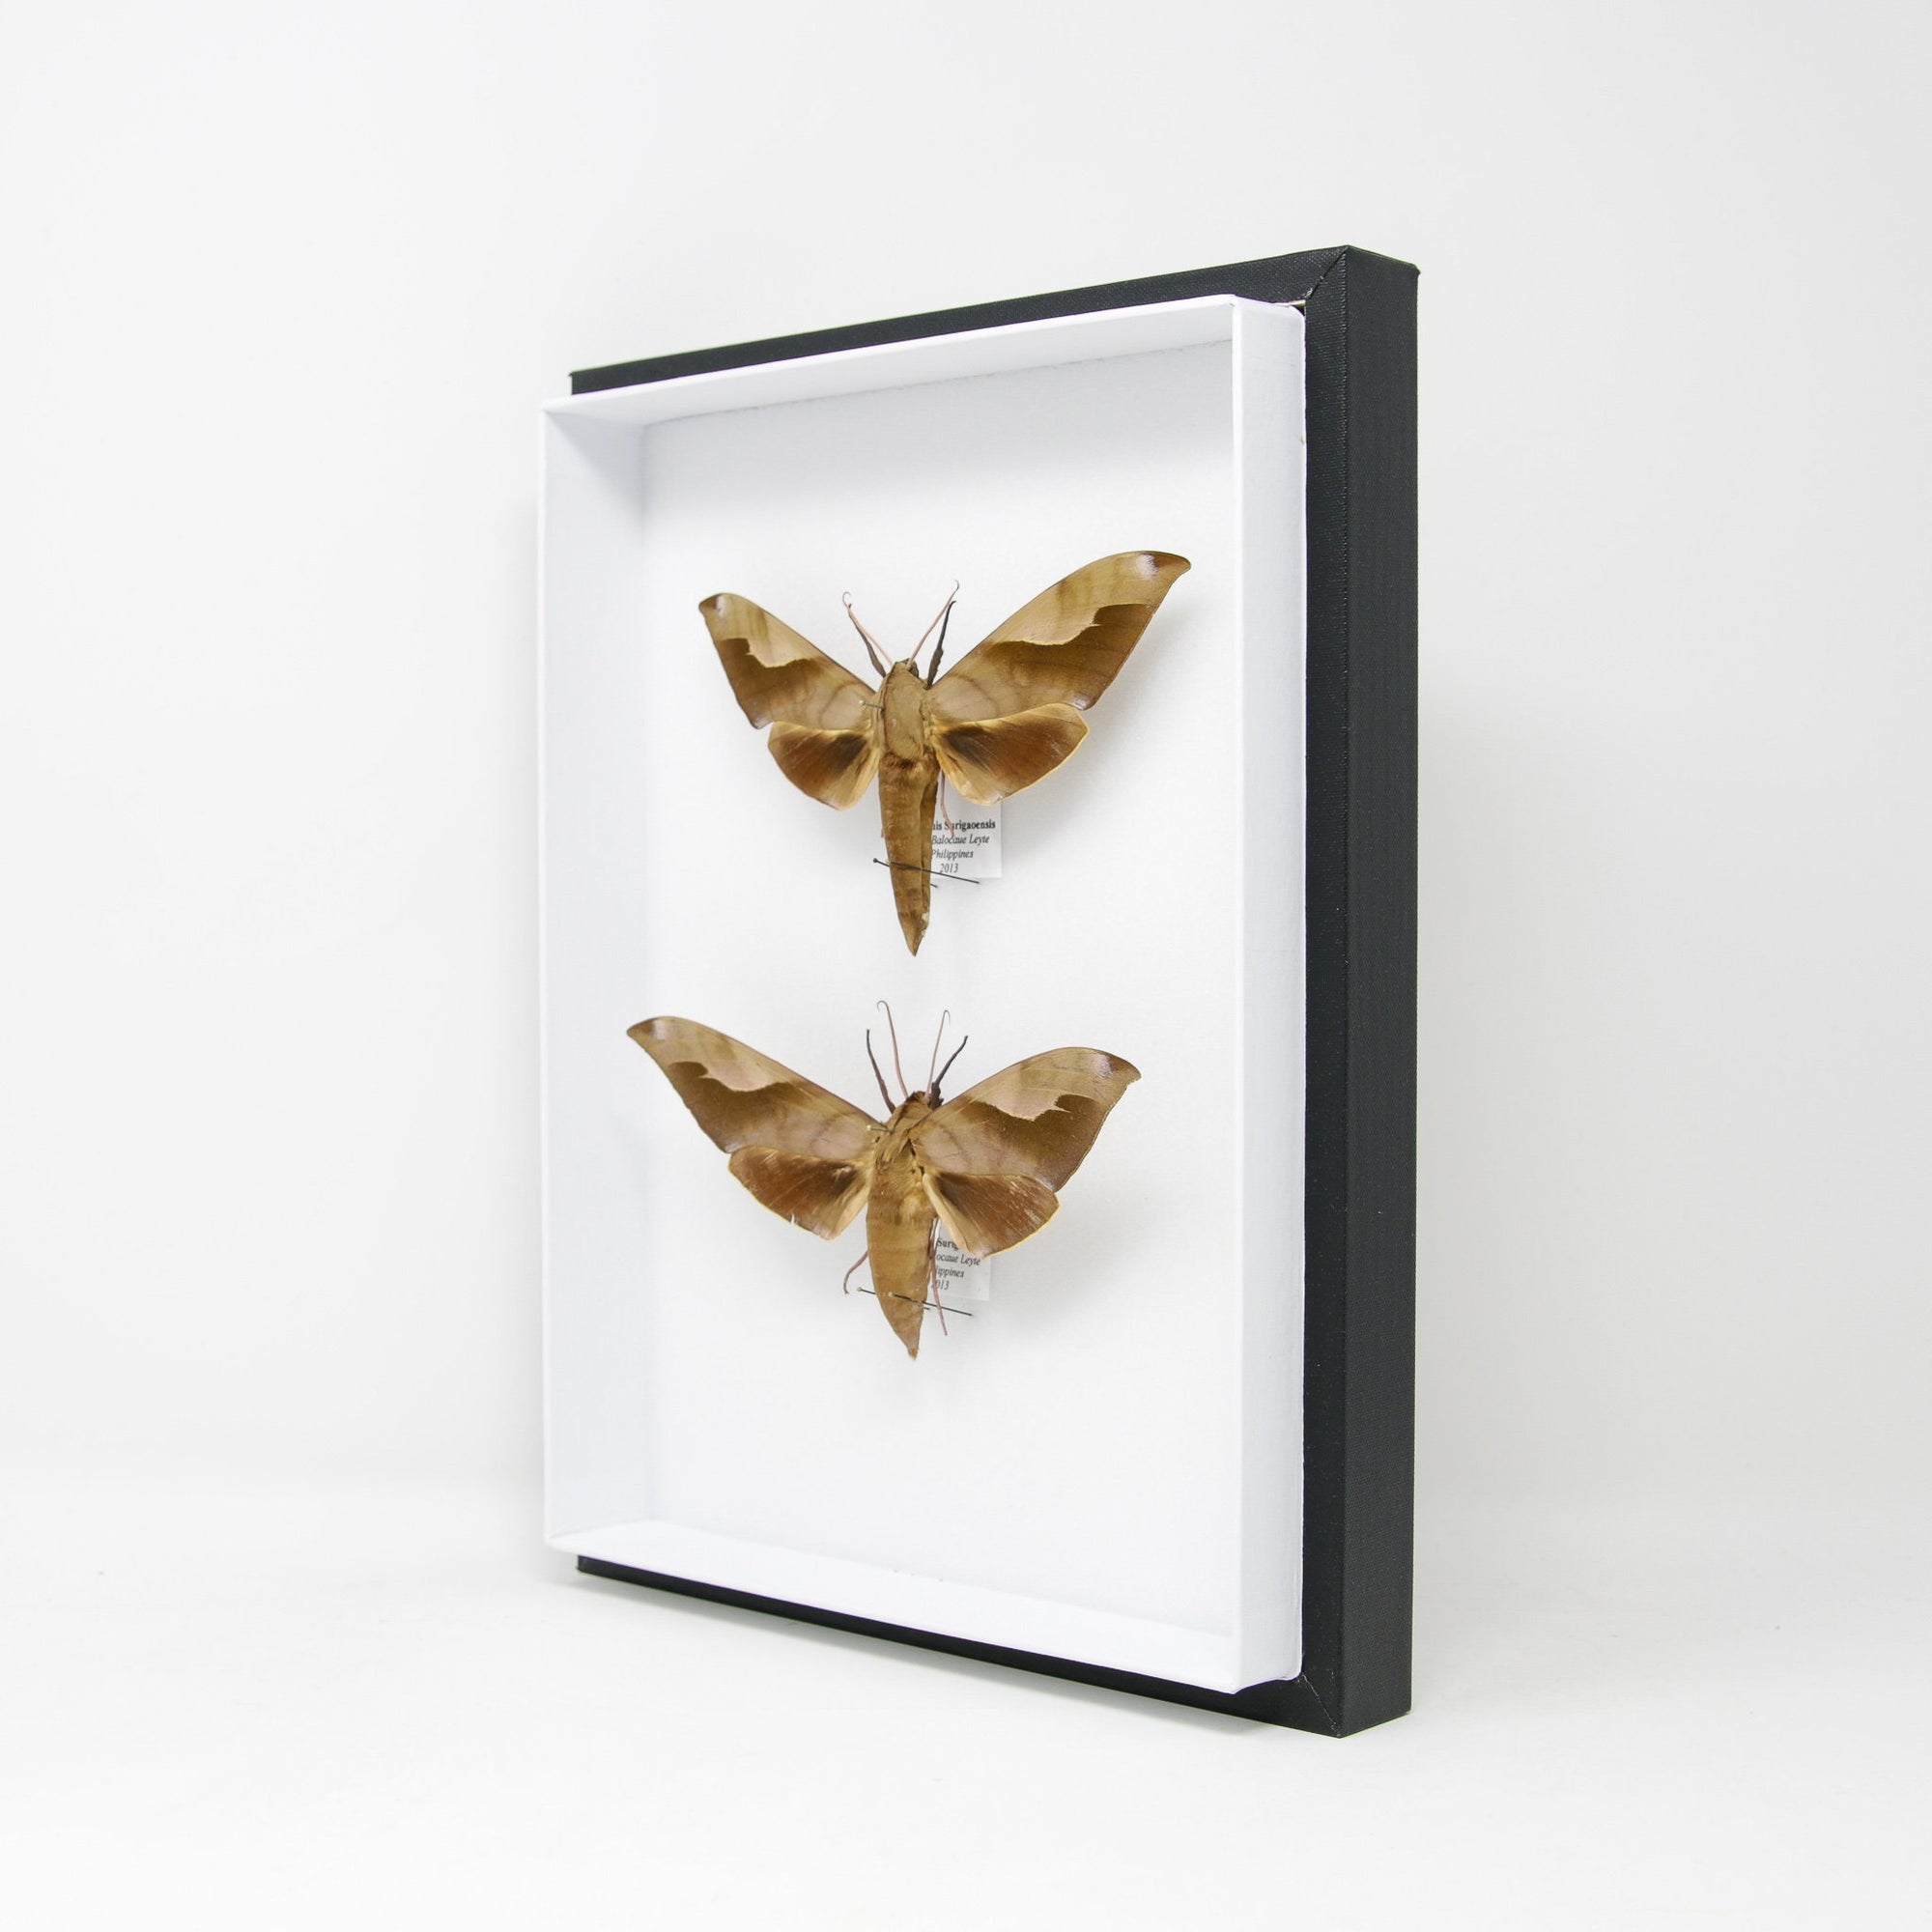 Hawkmoth Taxidermy Specimens | Clanis surigaoensis | Pinned Lepidoptera with Scientific Collection Data, Entomology Box Frame | 12x9x2 inch